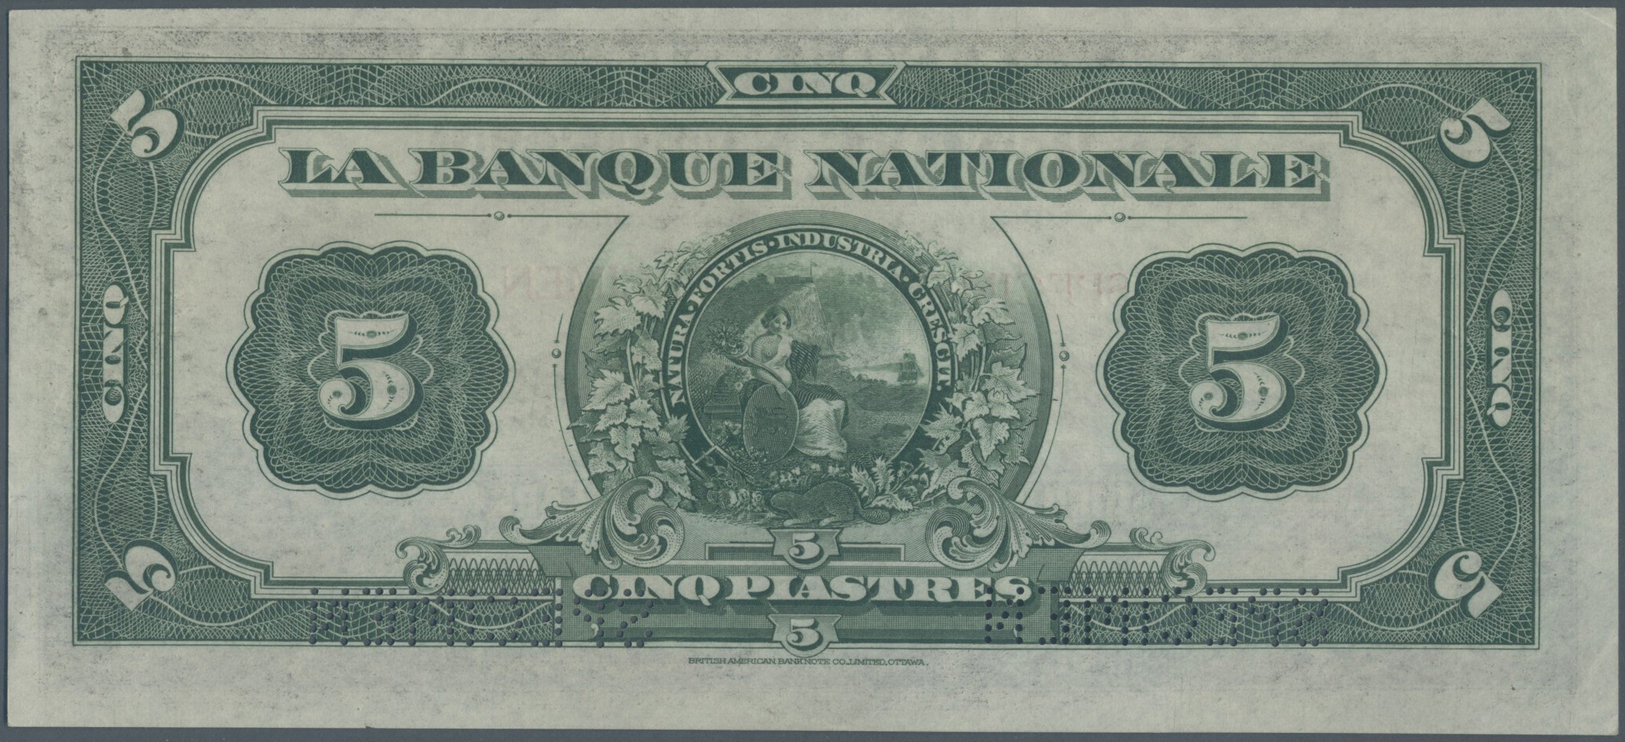 00483 Canada: La Banque Nationale 5 Dollars 1922 SPECIMEN, P.S871s With Ovpt. And Perforation Specimen And Excellent Con - Canada